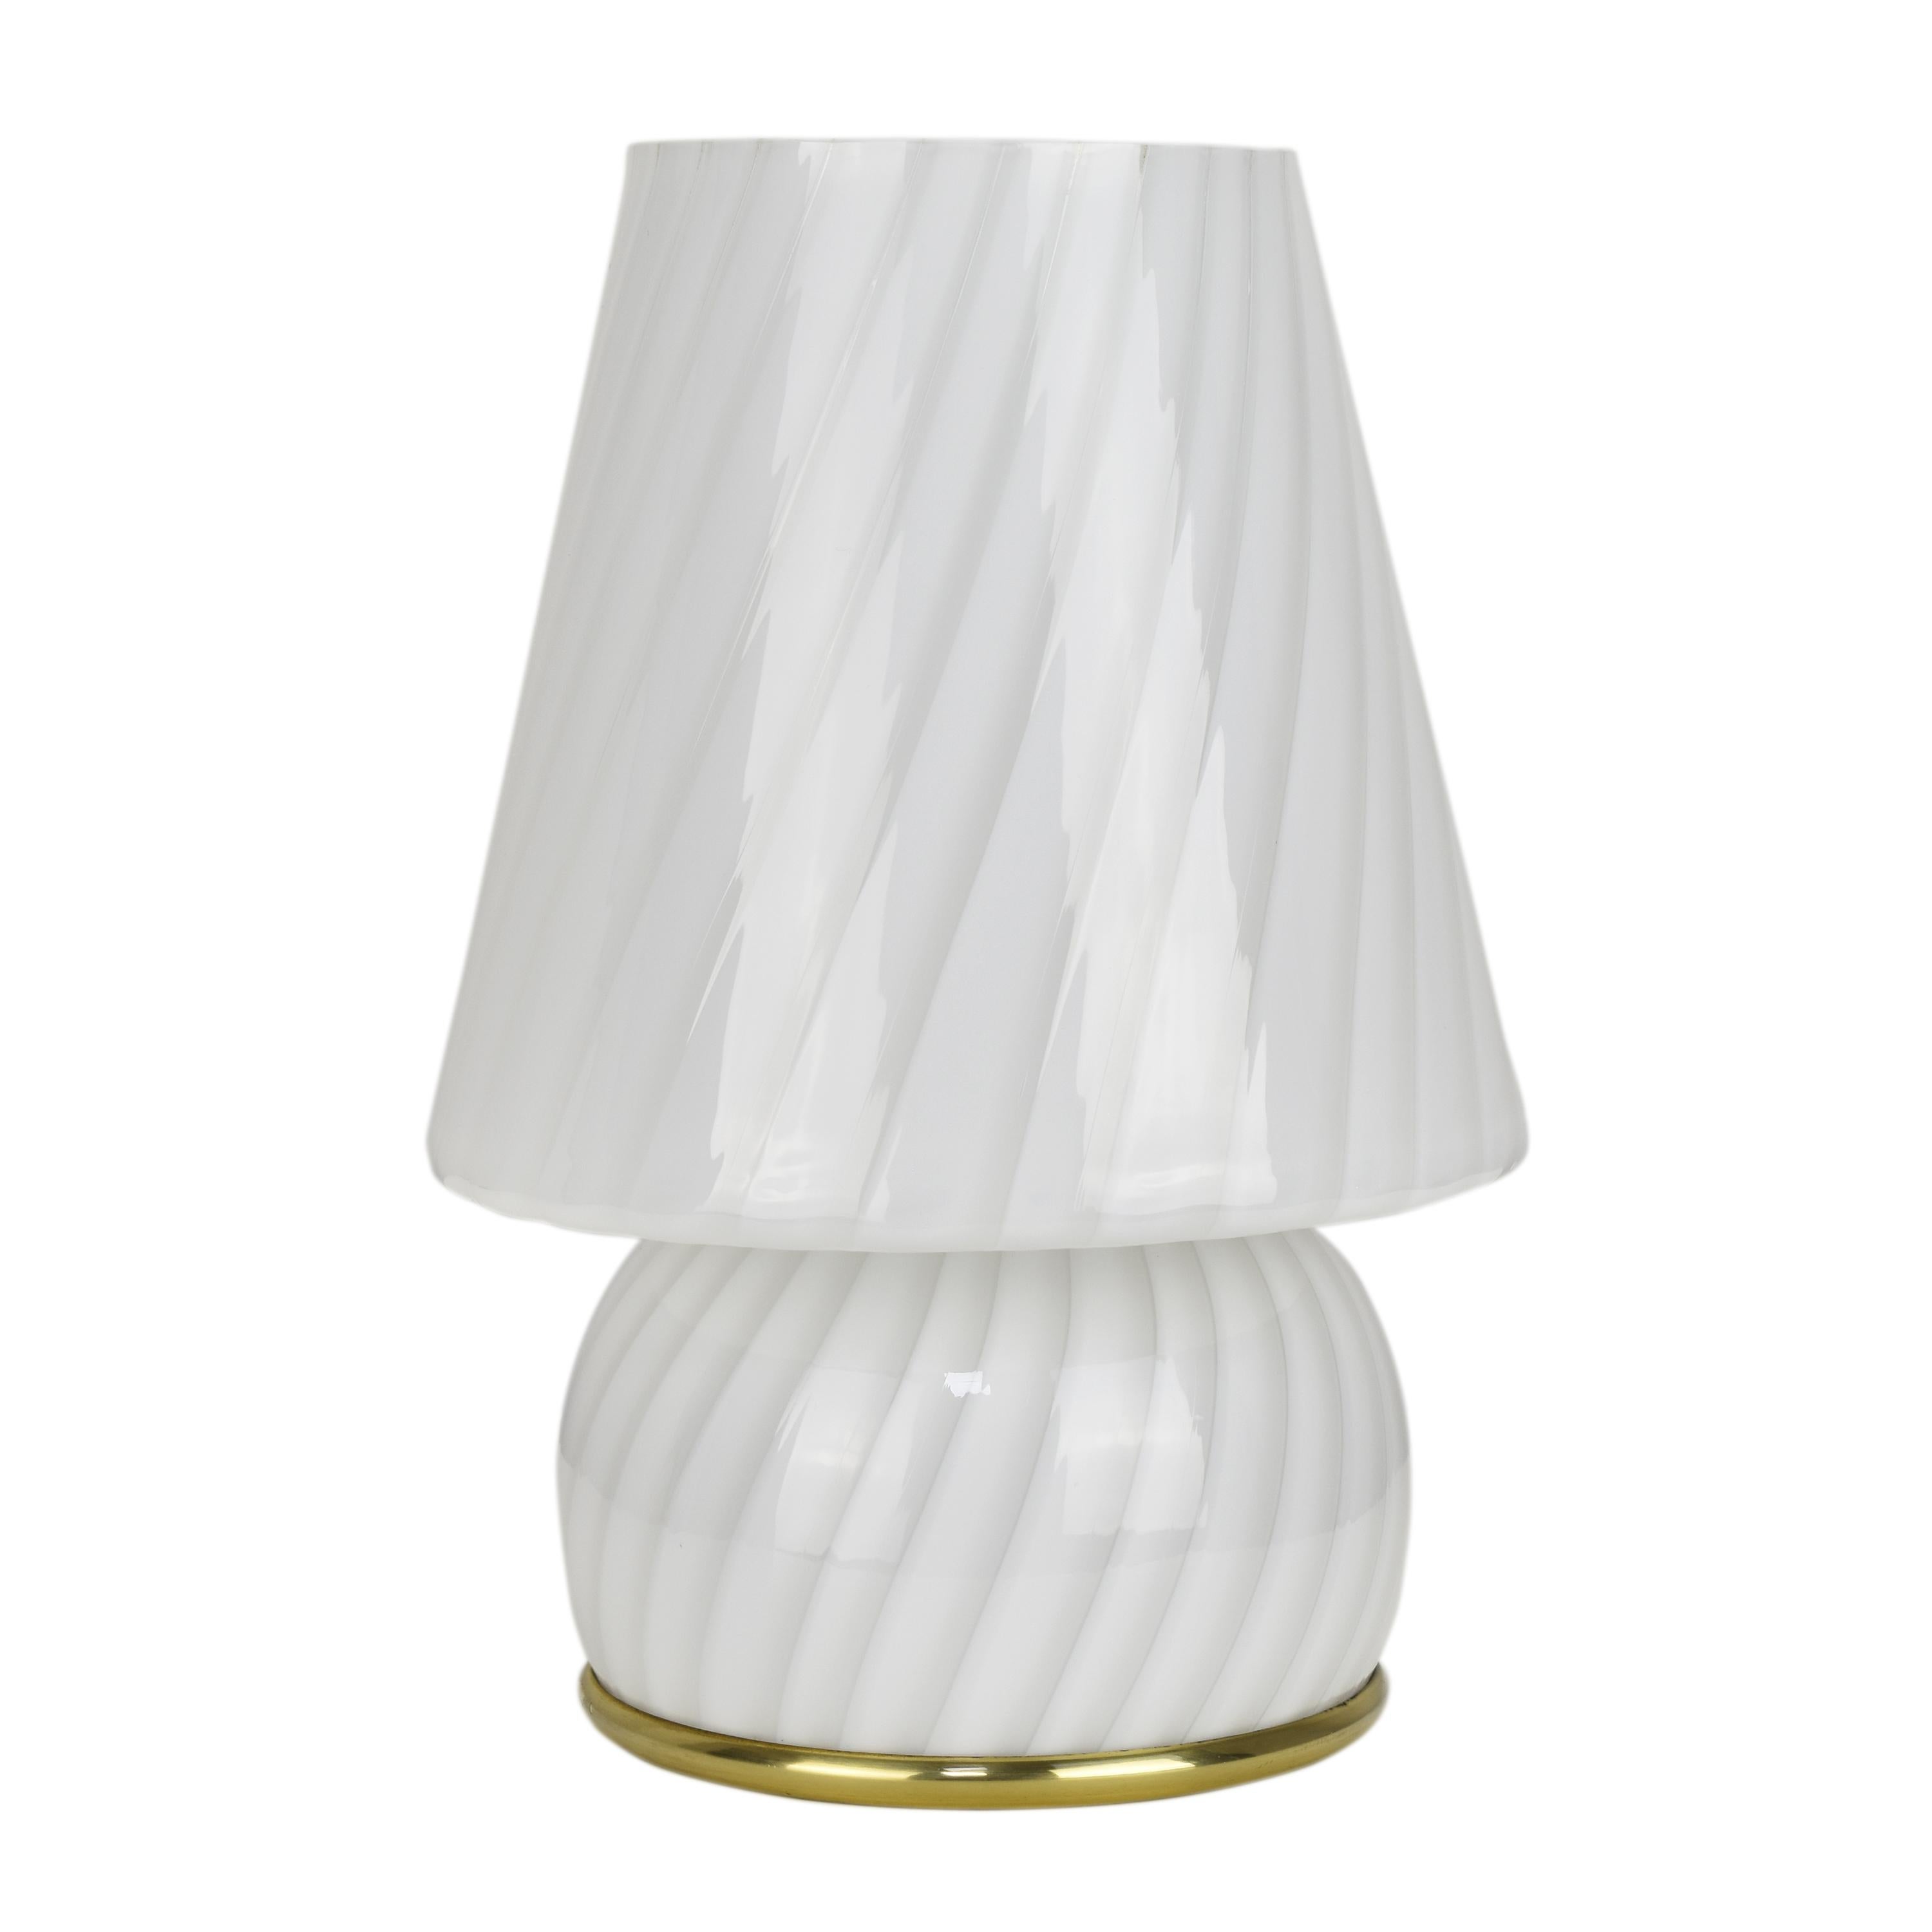 Vintage mushroom-shaped Murano white swirl art glass table lamp, a beautiful and handcrafted piece of lighting design, made in the 1960s by the Italian company Artemide. 
The lamp features a hand-blown glass base in the shape of a mushroom, with a